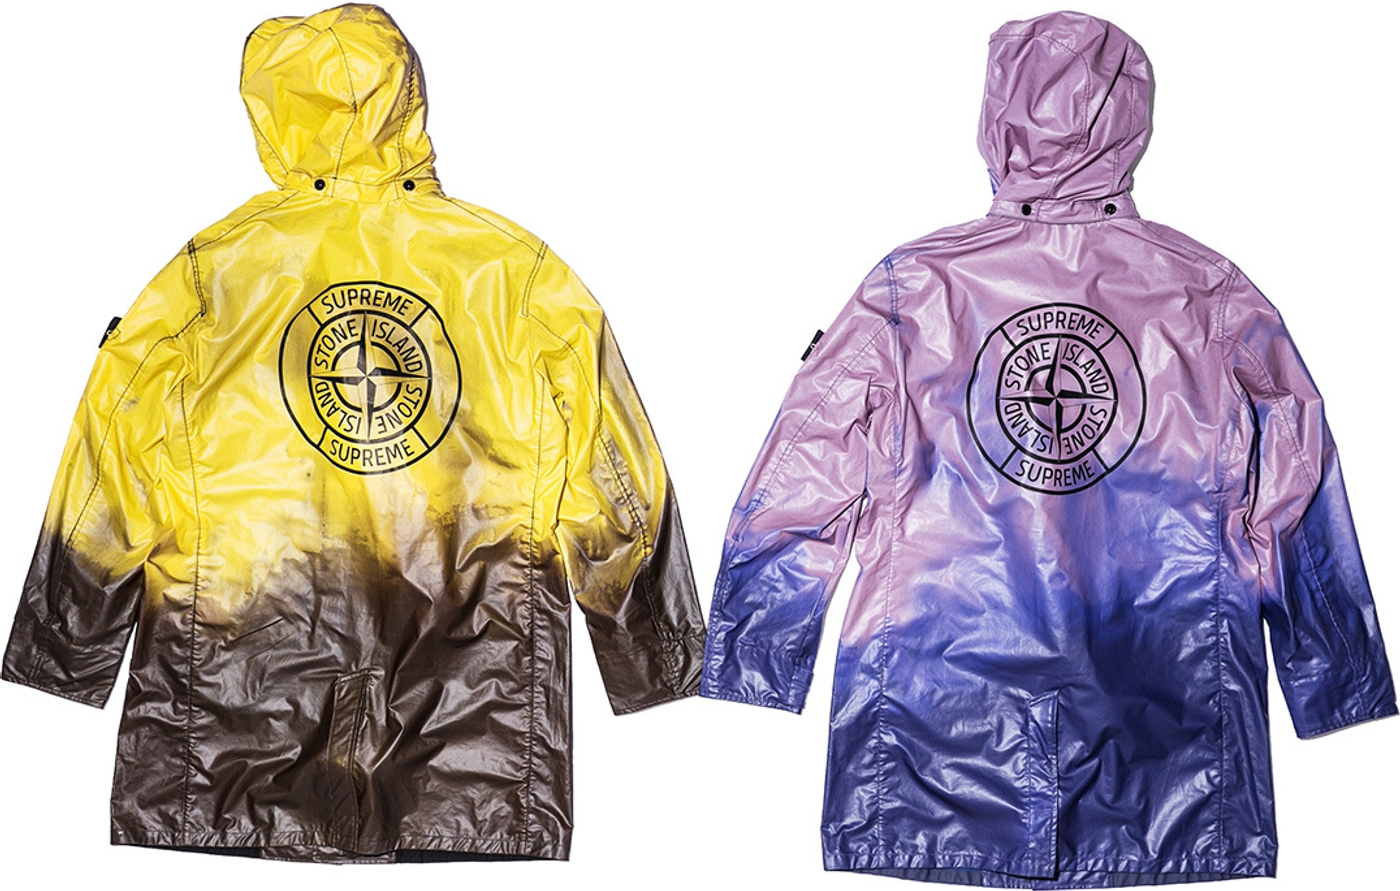 Water resistant thermosensitive Heat Reactive polyurethane coated cotton fabric with removable hood. (11/24)